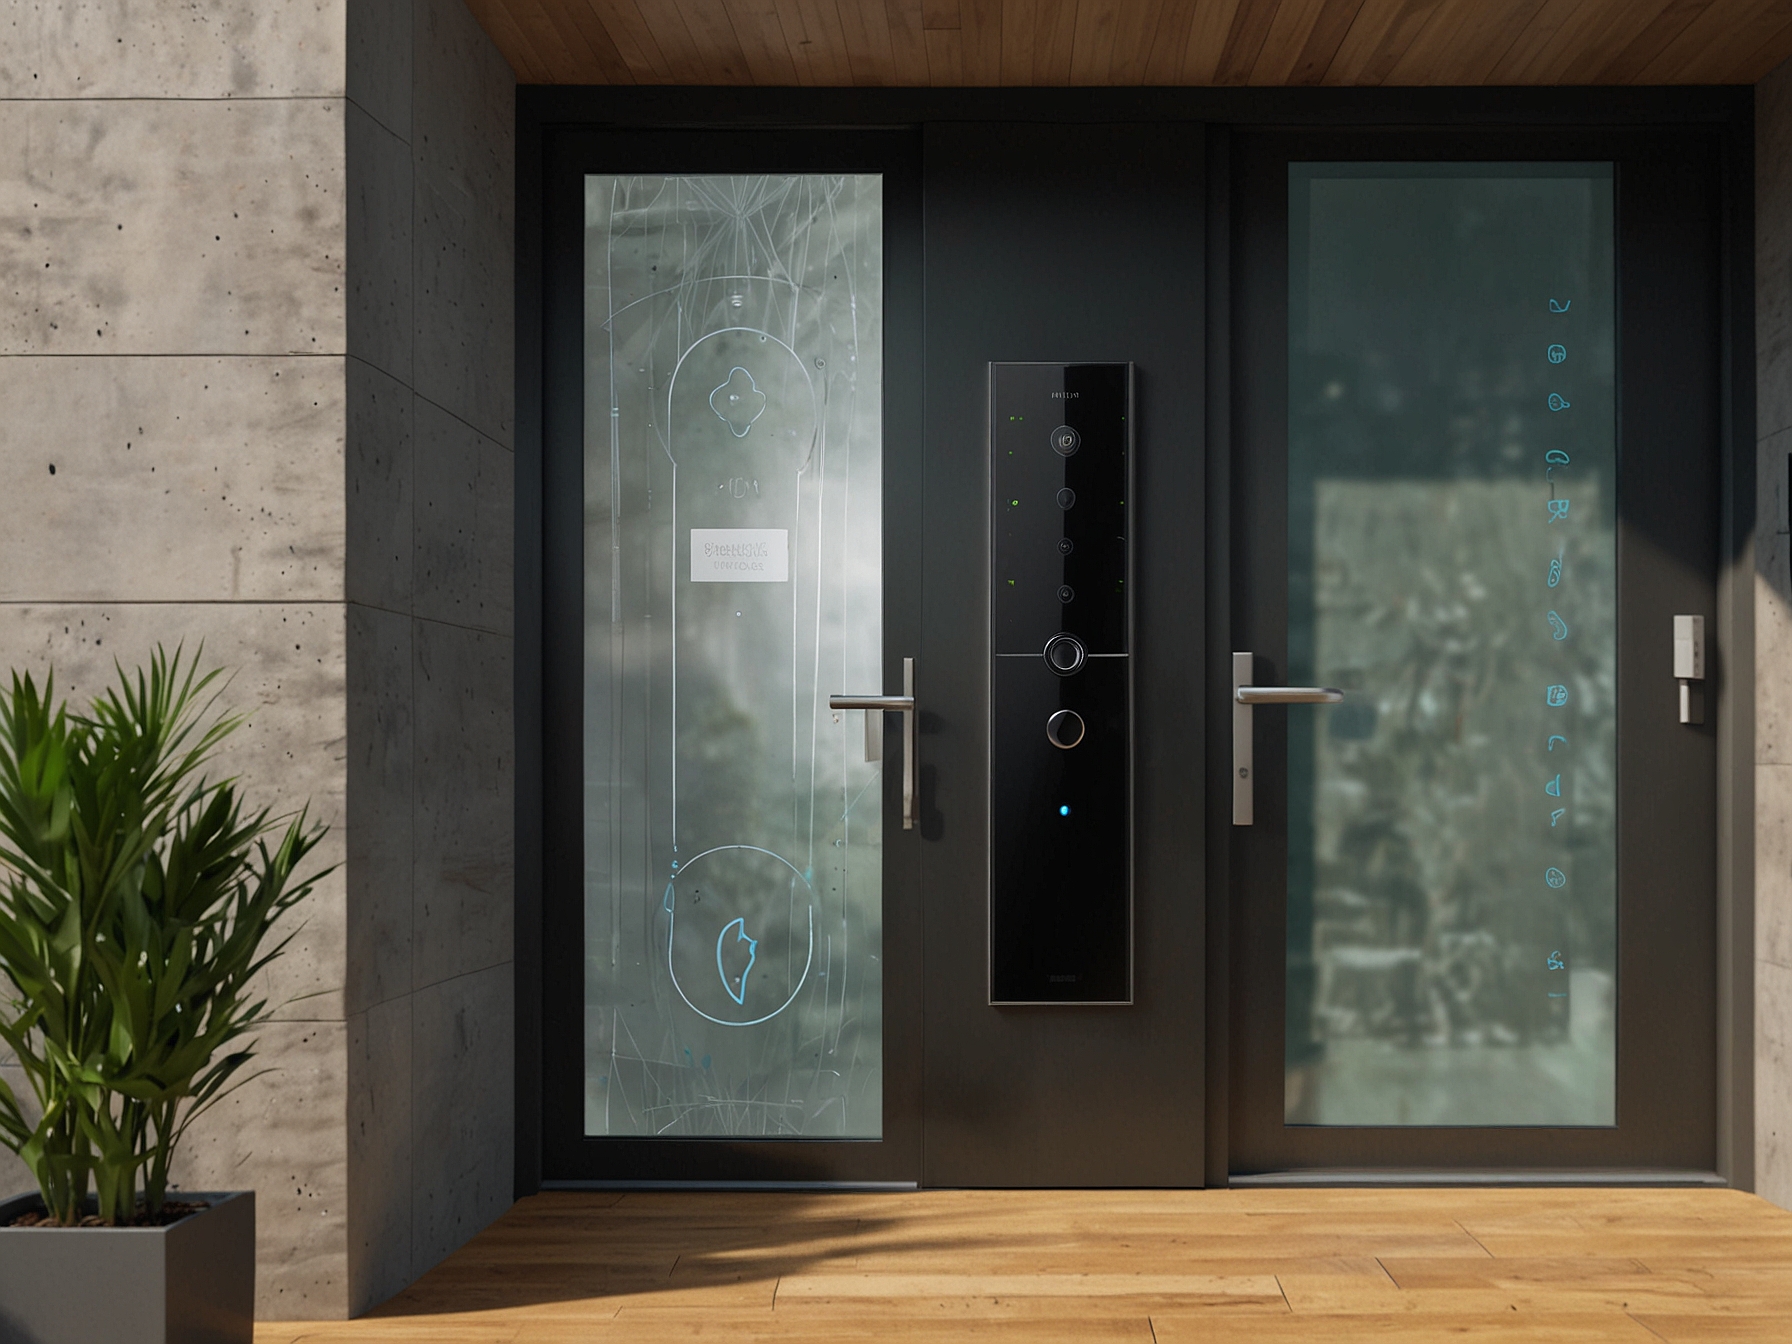 A sleek front door equipped with the Philips Home Access 5000 Series Palm Recognition Smart Lock, showing its modern design and seamless integration with home aesthetics.